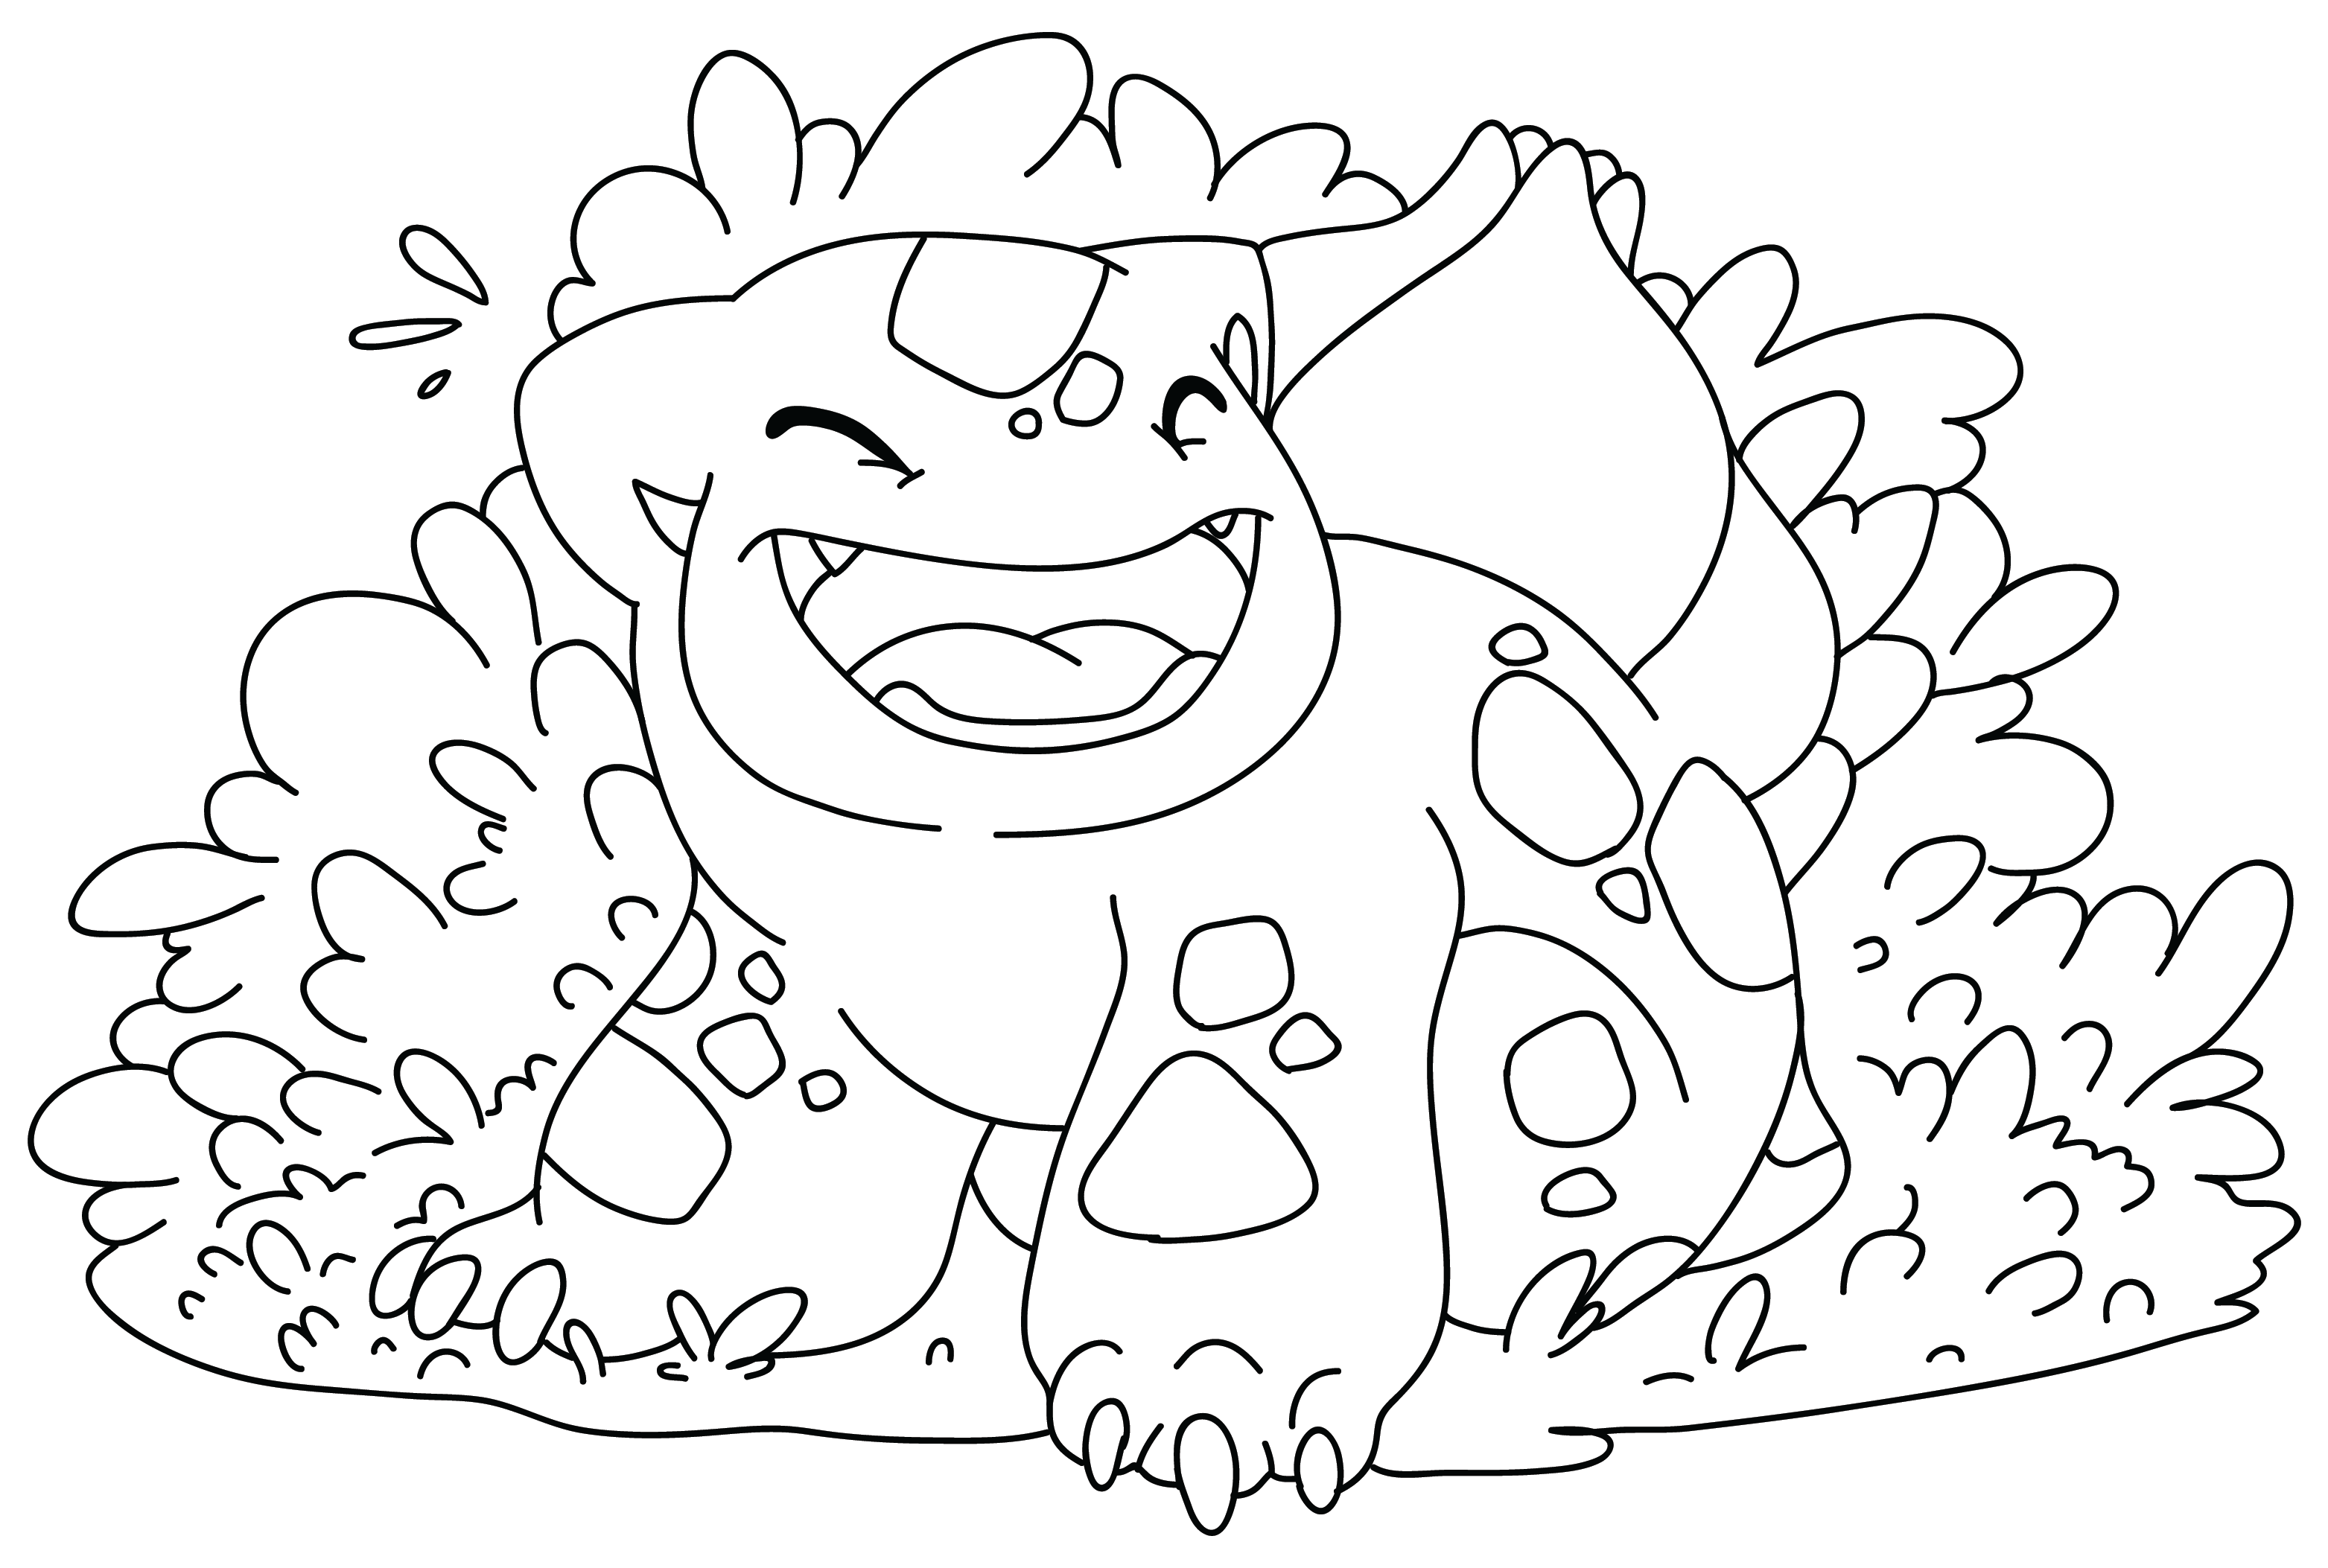 Coloring Page Images Bulbasaur from Bulbasaur